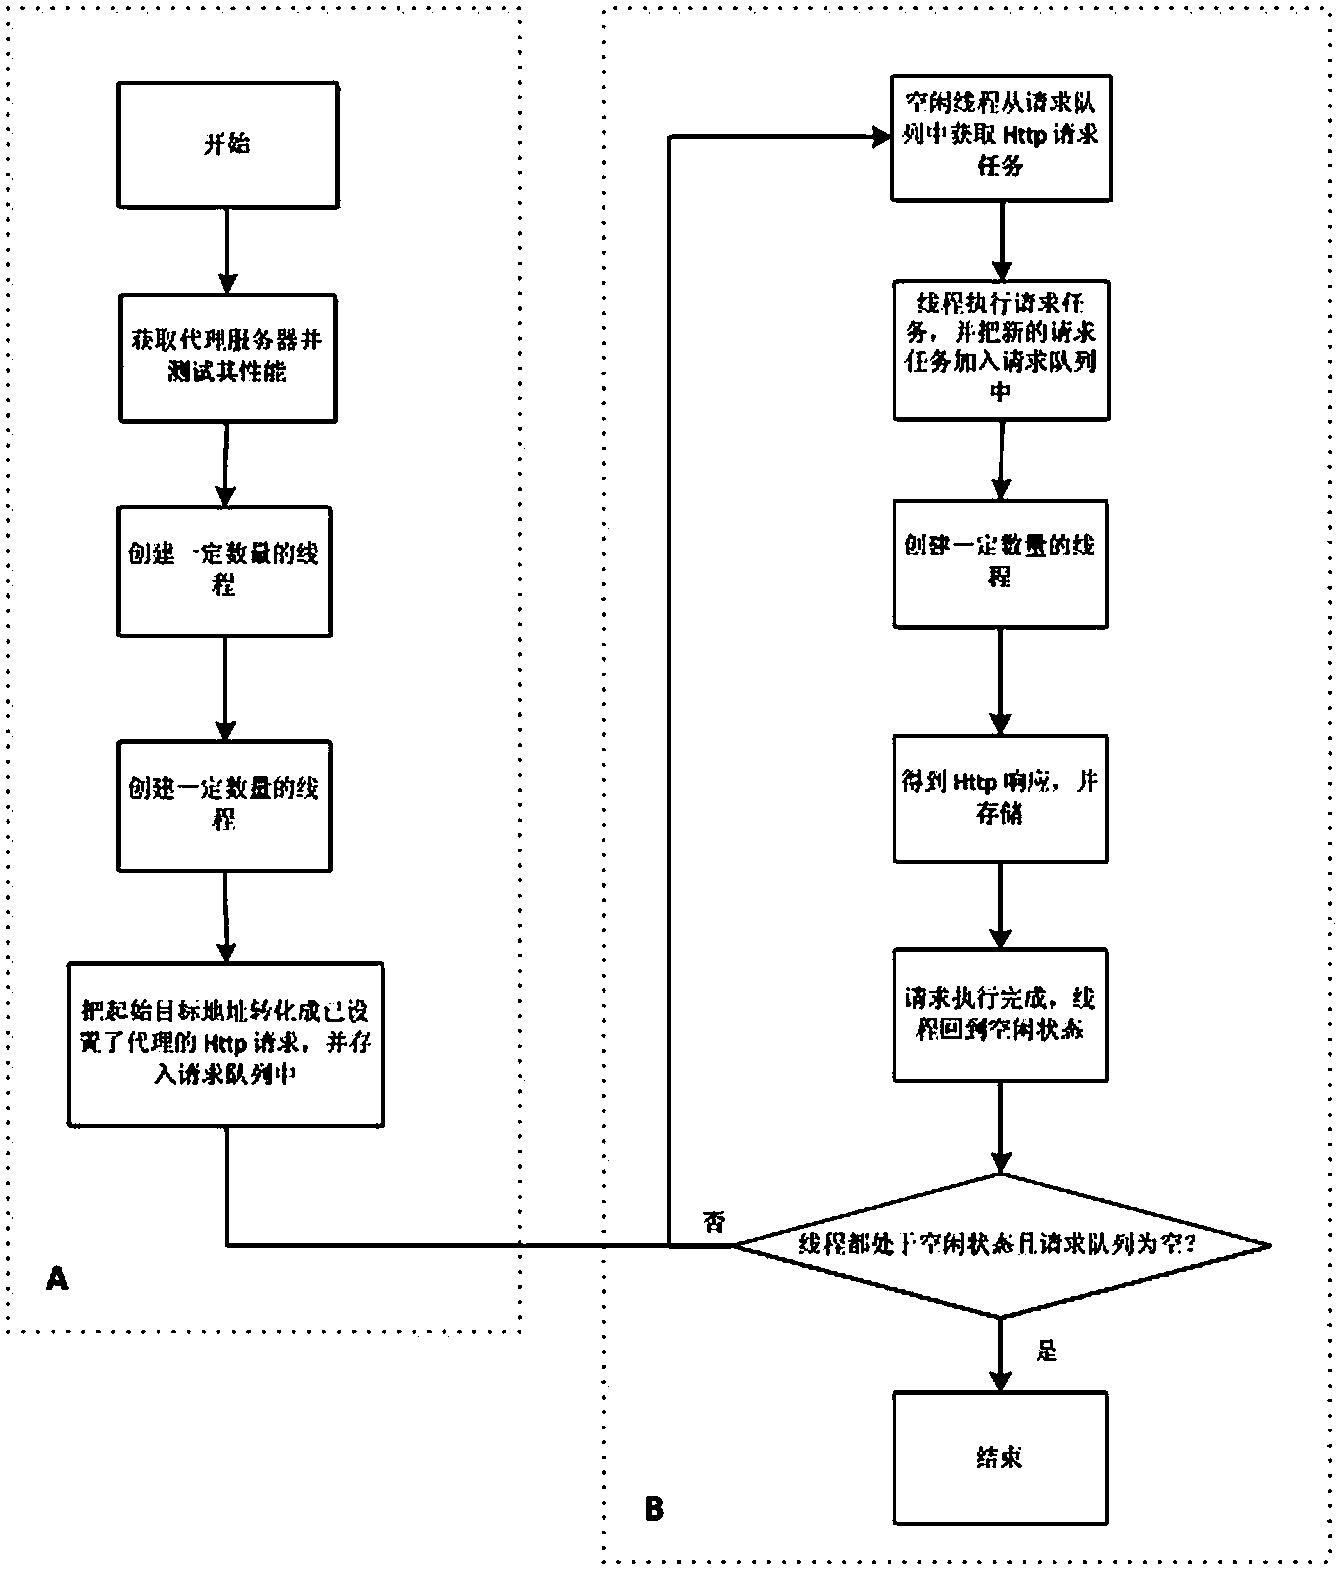 Multi-thread network crawler processing method based on connection proxy optimal management